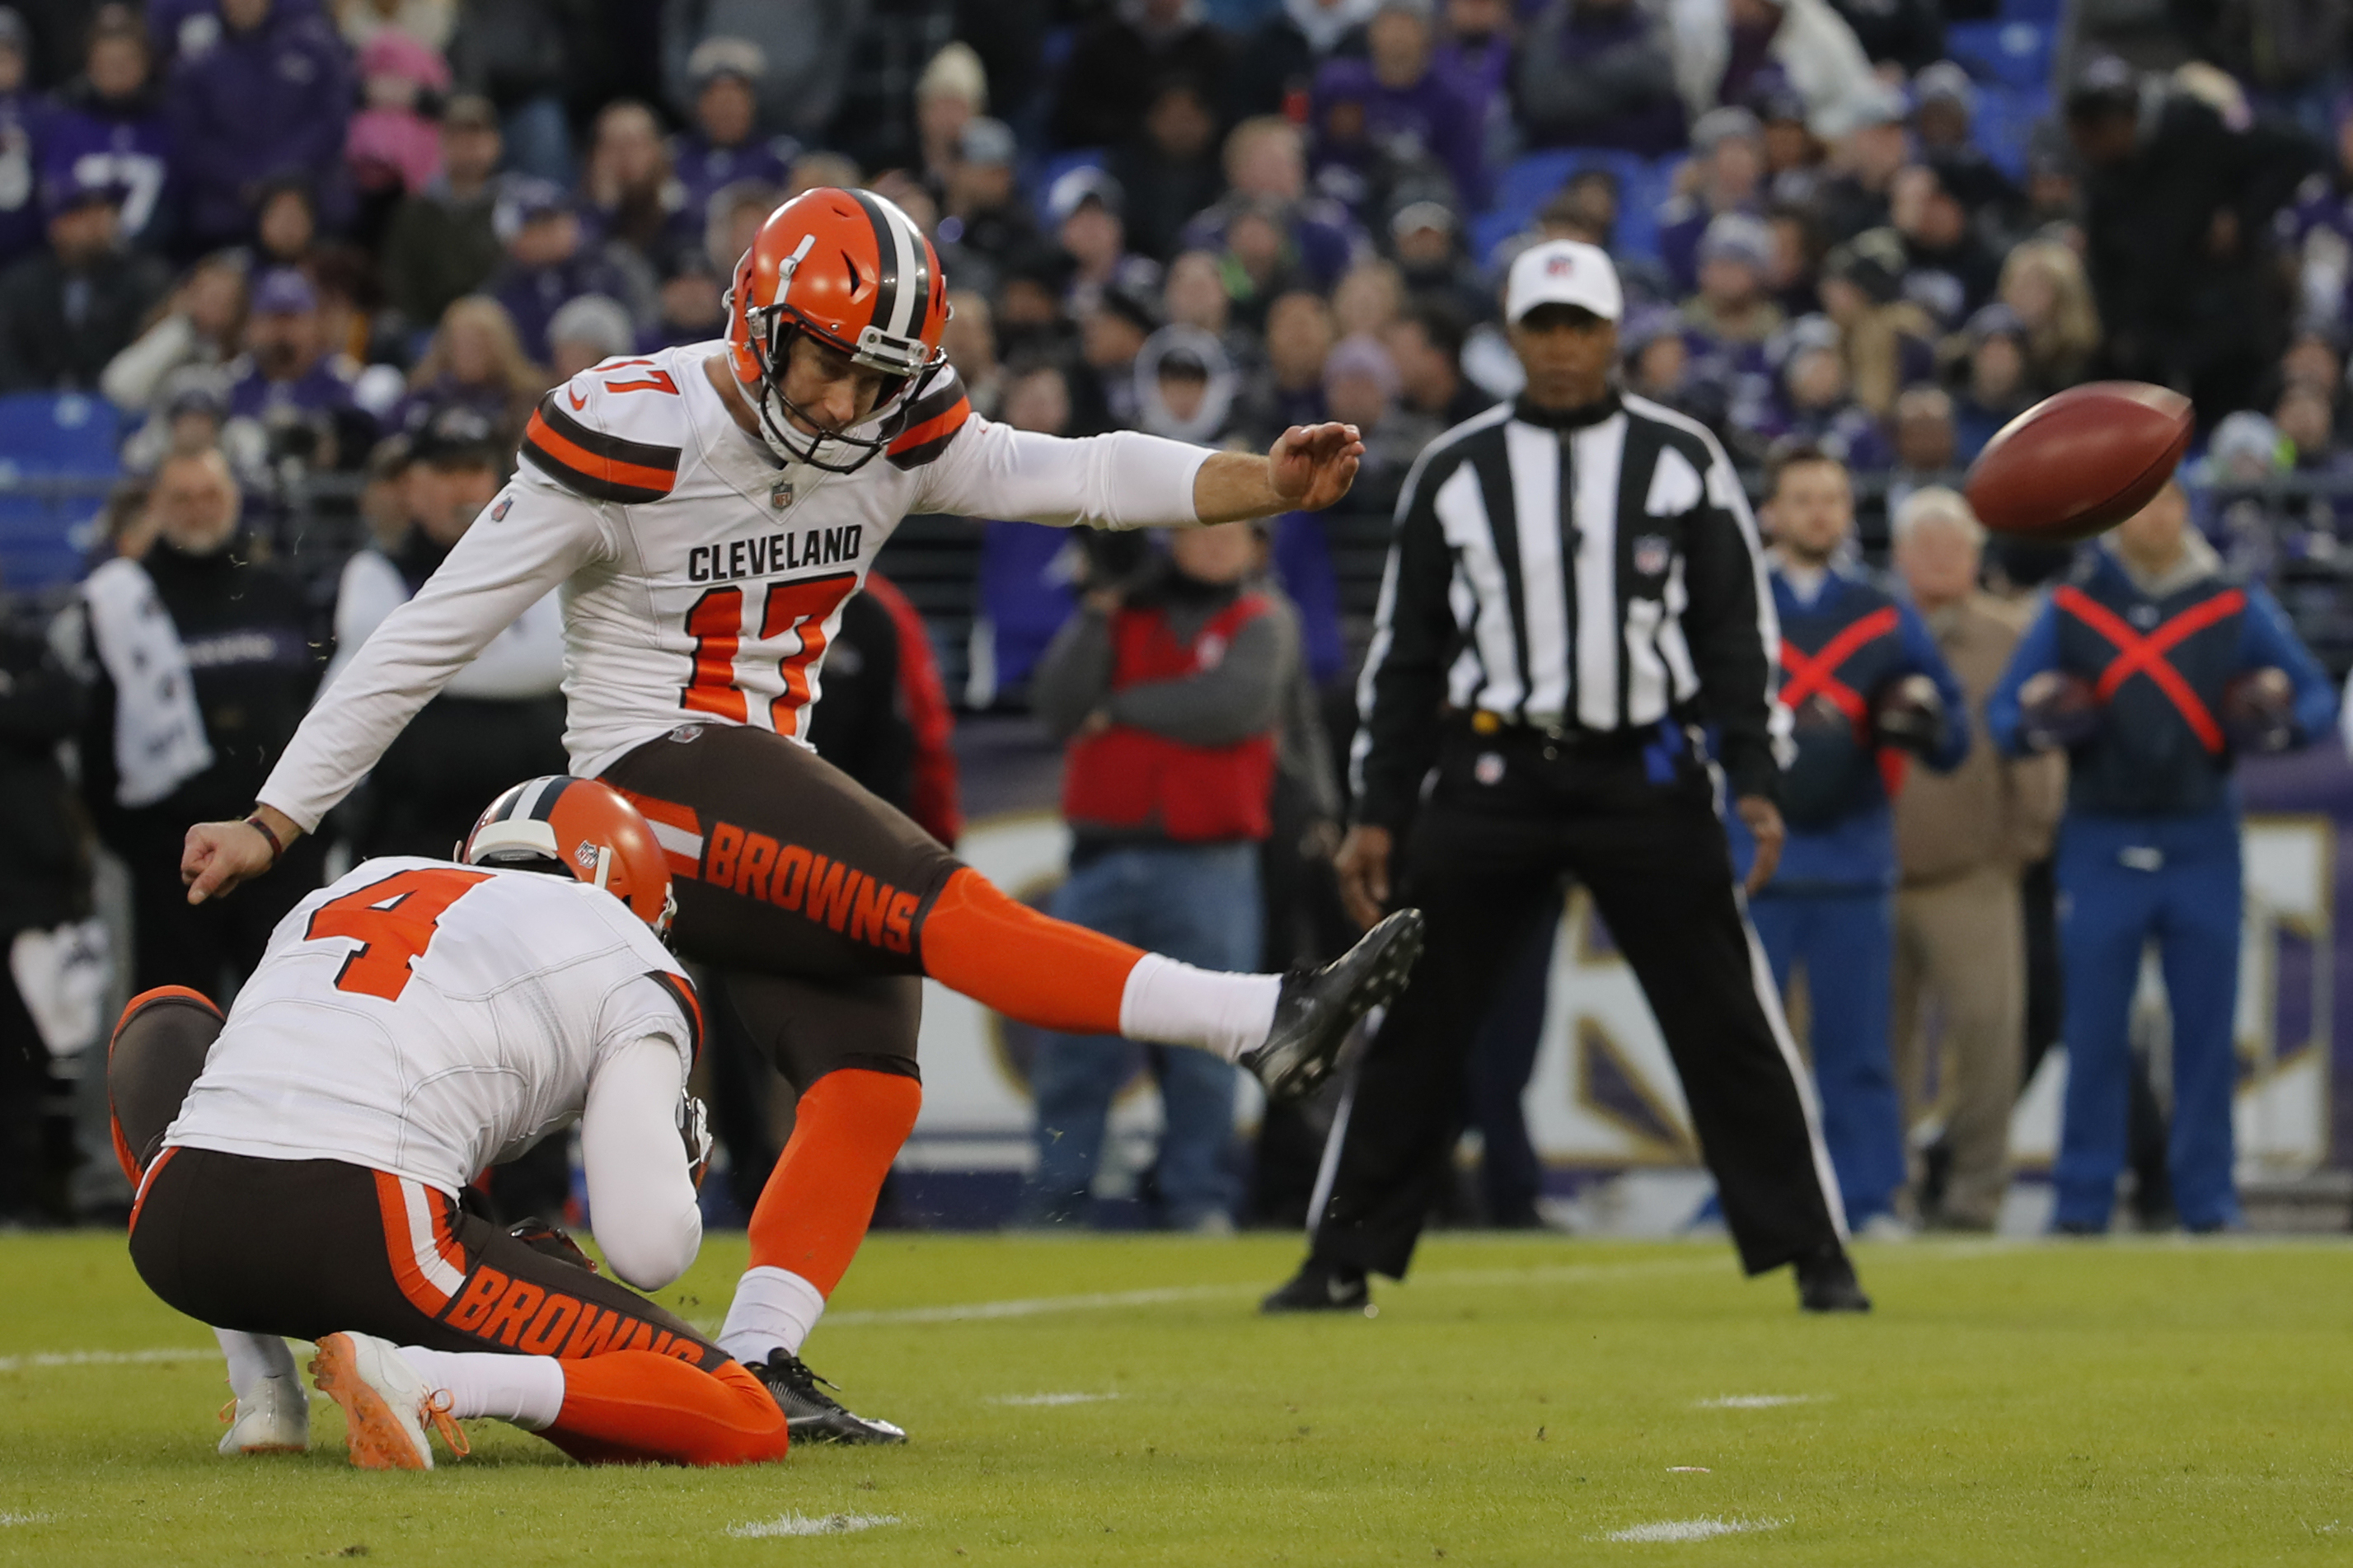 Middle men: Browns hoping erratic kickers straighten out